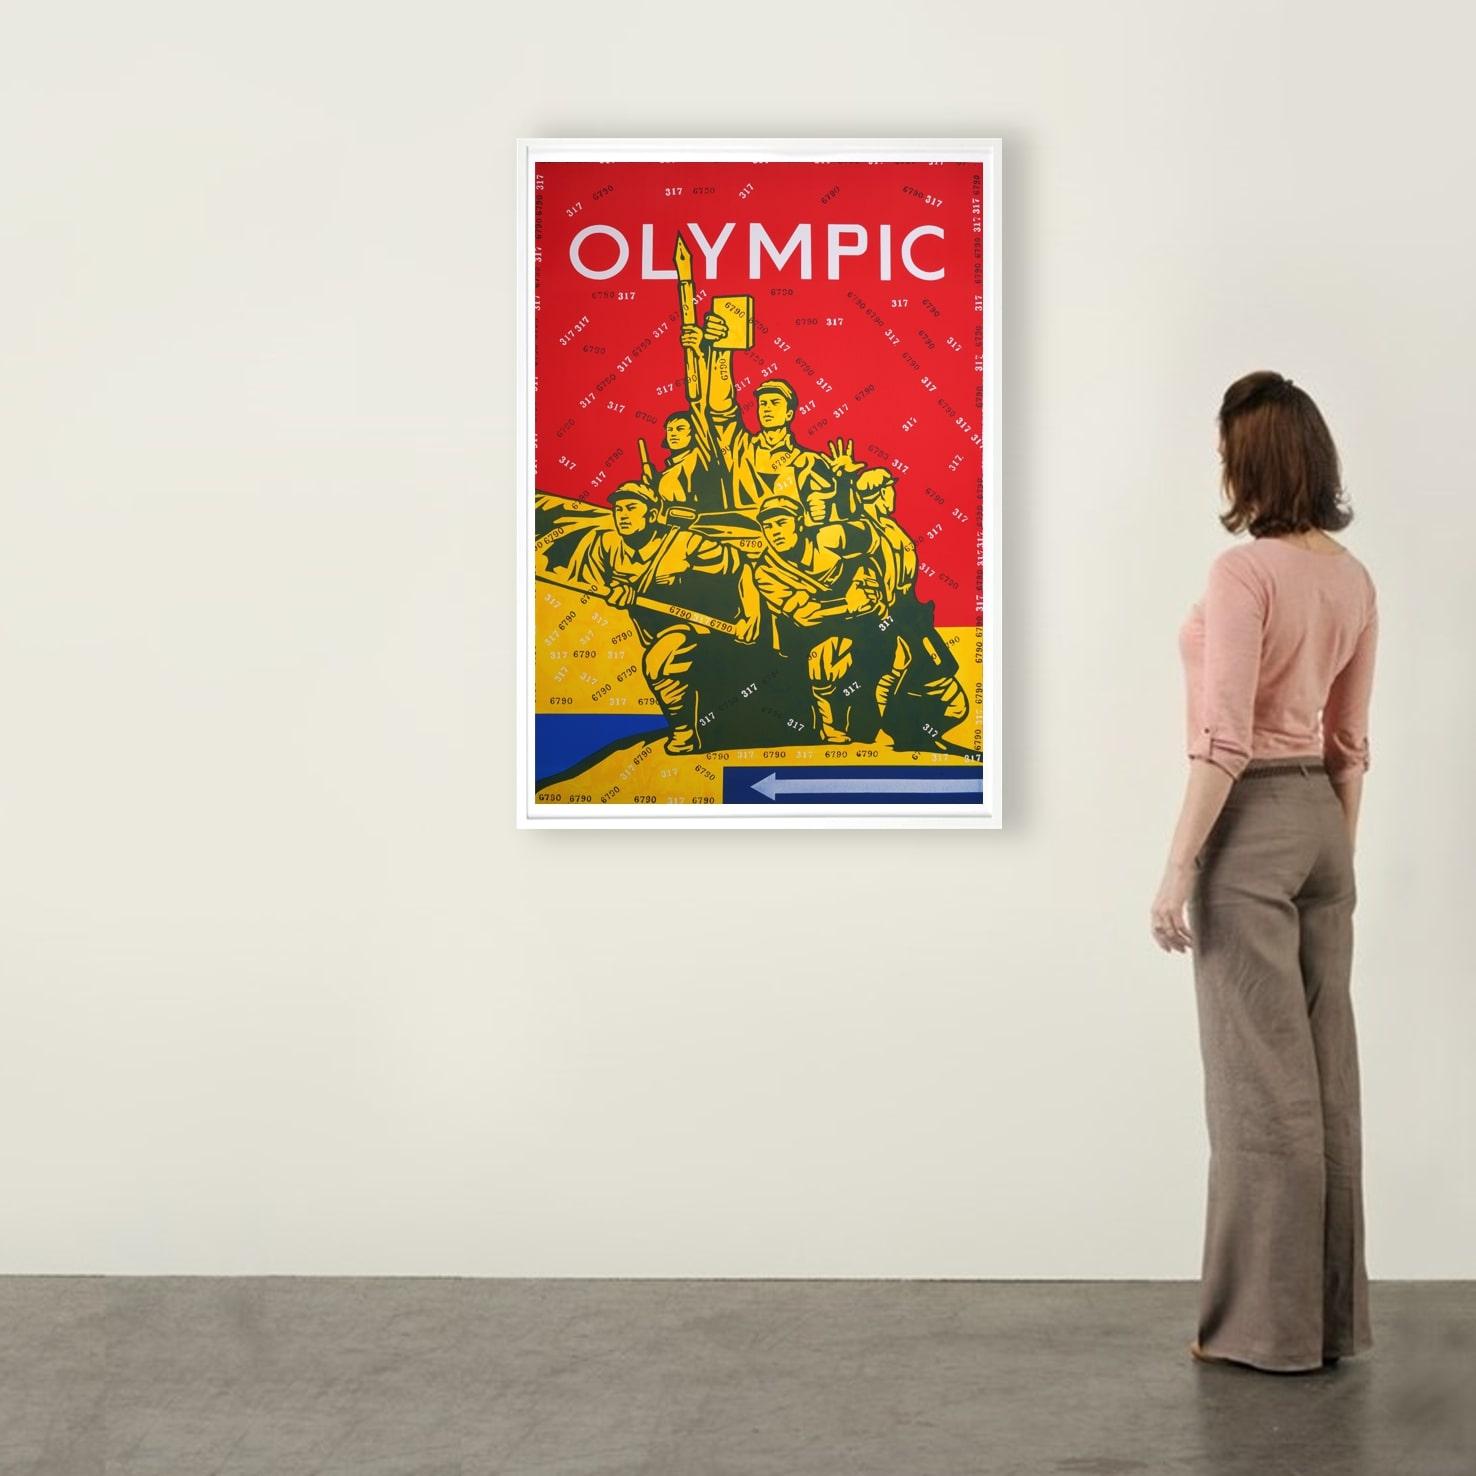 Wang Guangyi, Olympic I
Contemporary, 21st Century, Lithograph, Limited Edition, Chinese art
Lithograph  on Velin BFK Rives 300 gr 
Accompanied by poem by Fernando Arrabal
120 x 80 cm (47.2 x 31.5 in.)
Edition of 165 plus 4 APs
Signed and numbered,